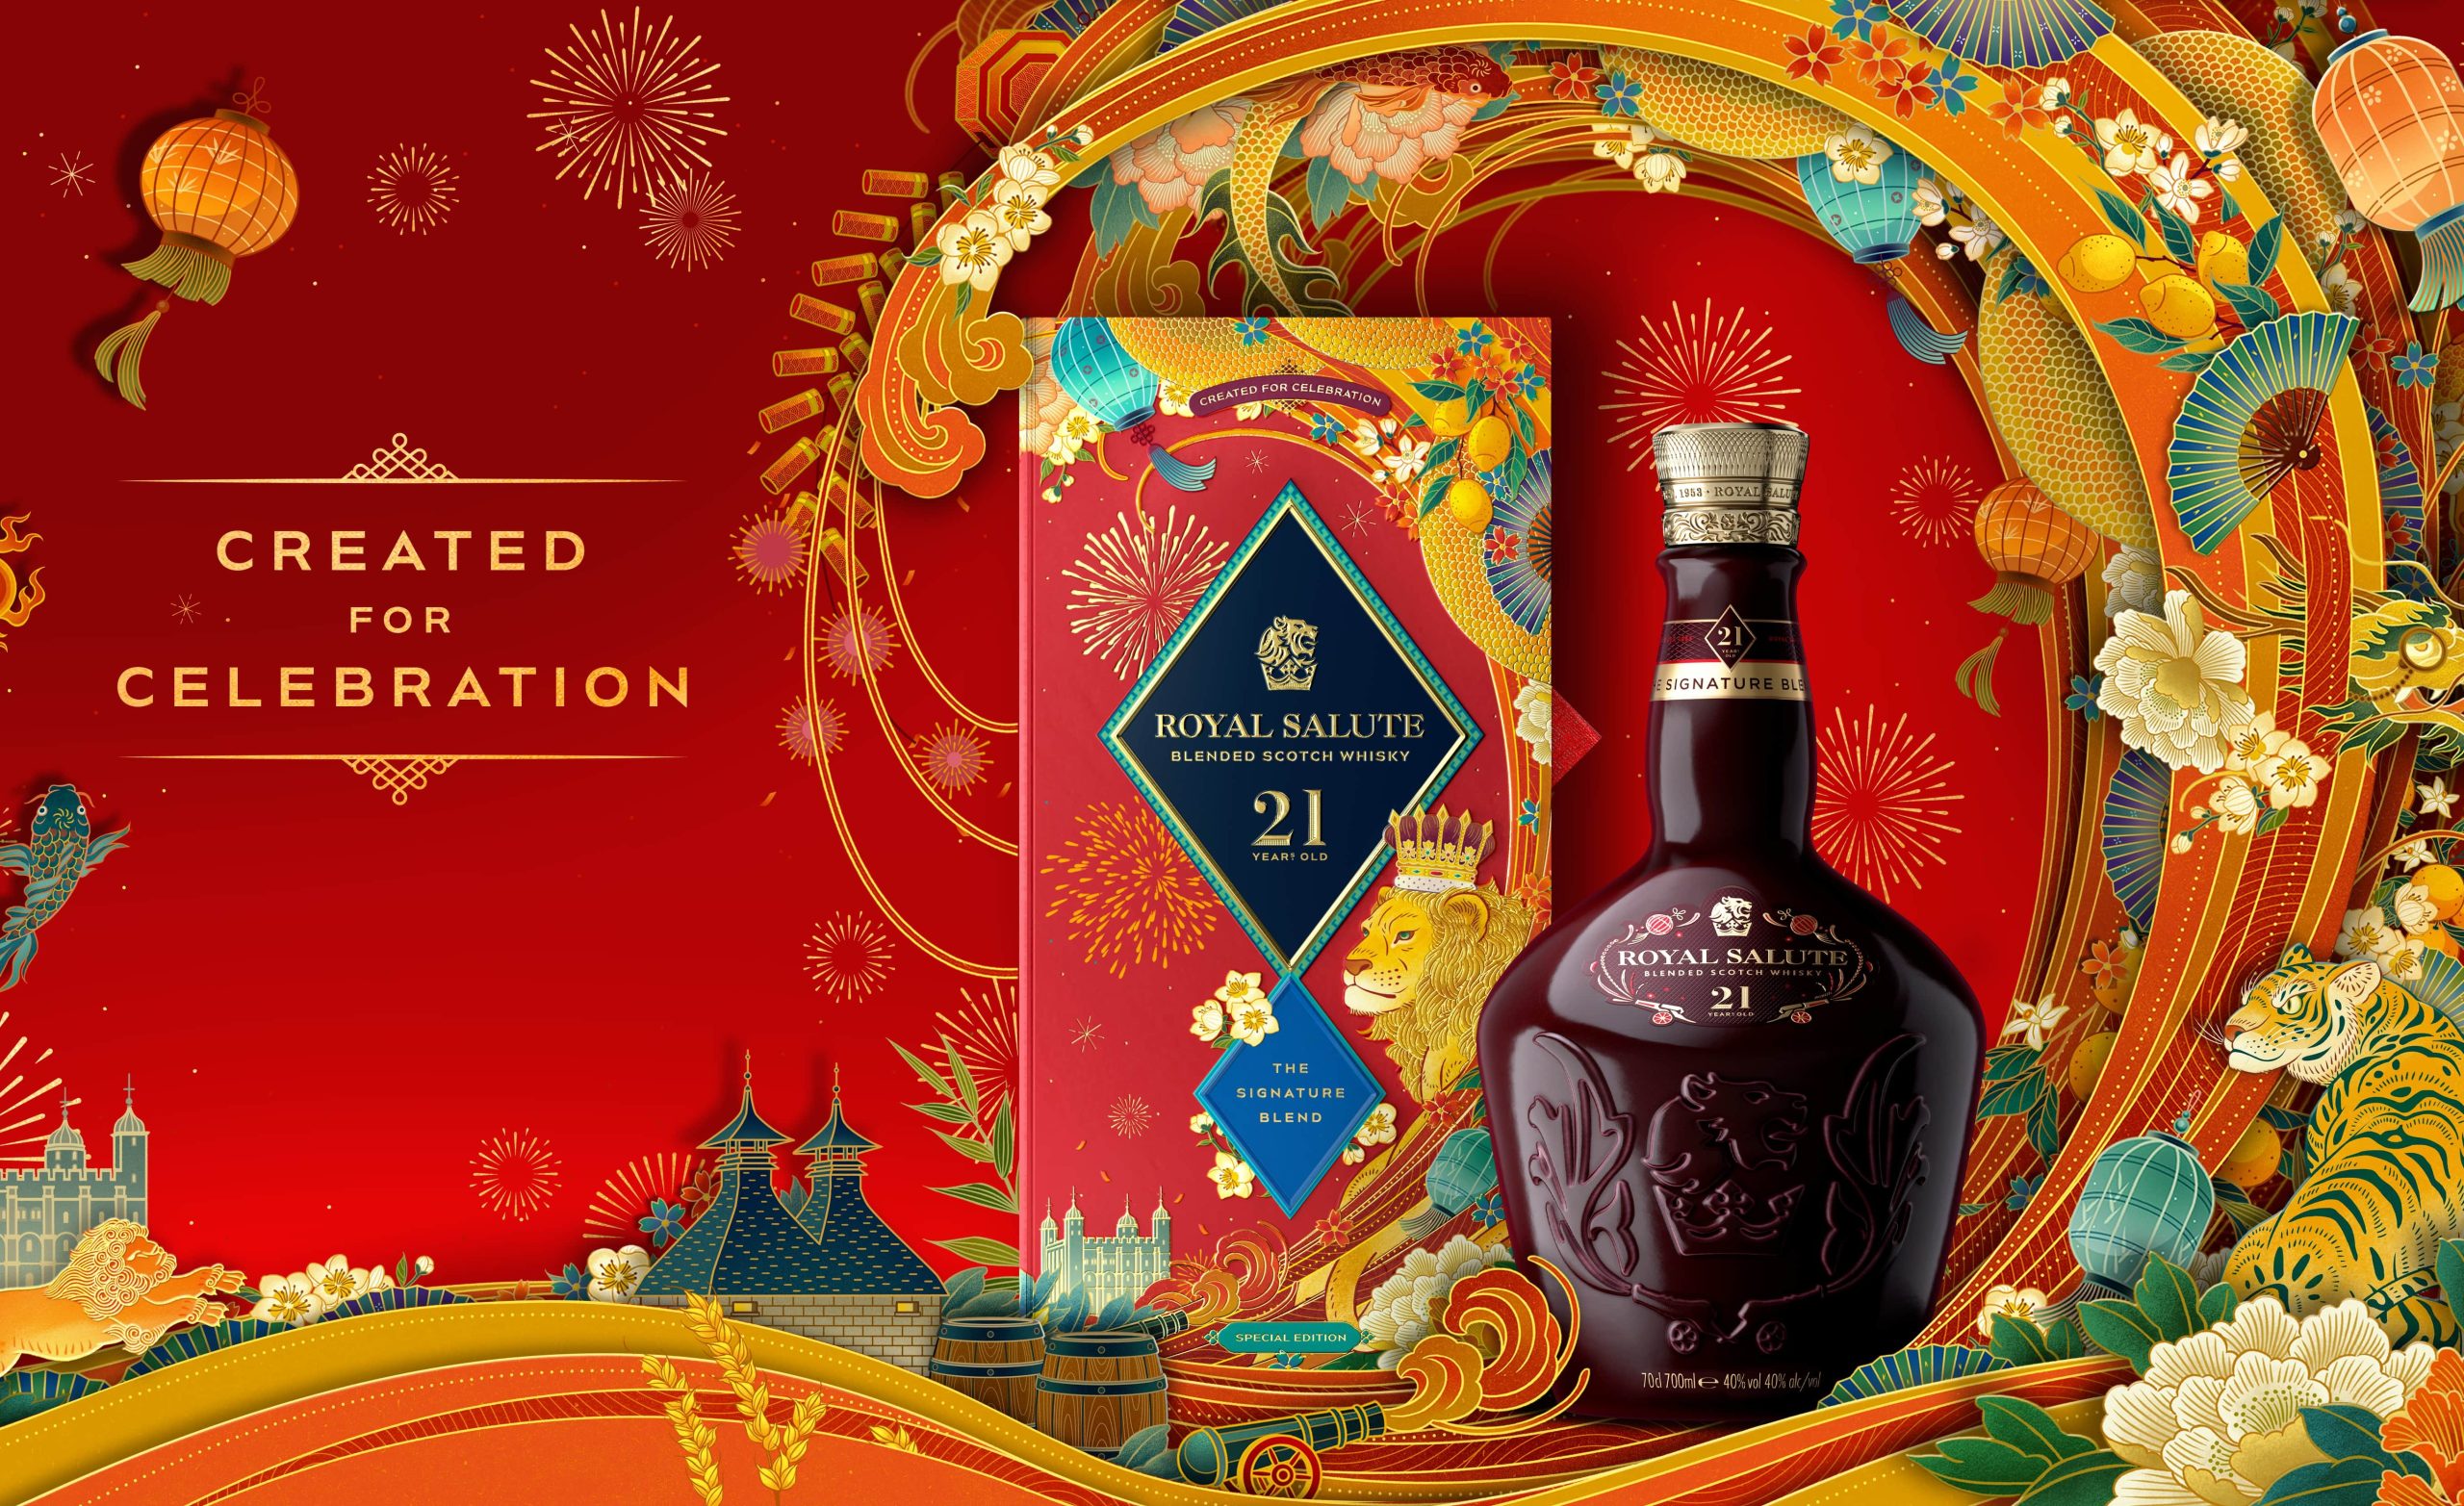 Lunar New Year Special Edition Scotch Whisky Royal Salute